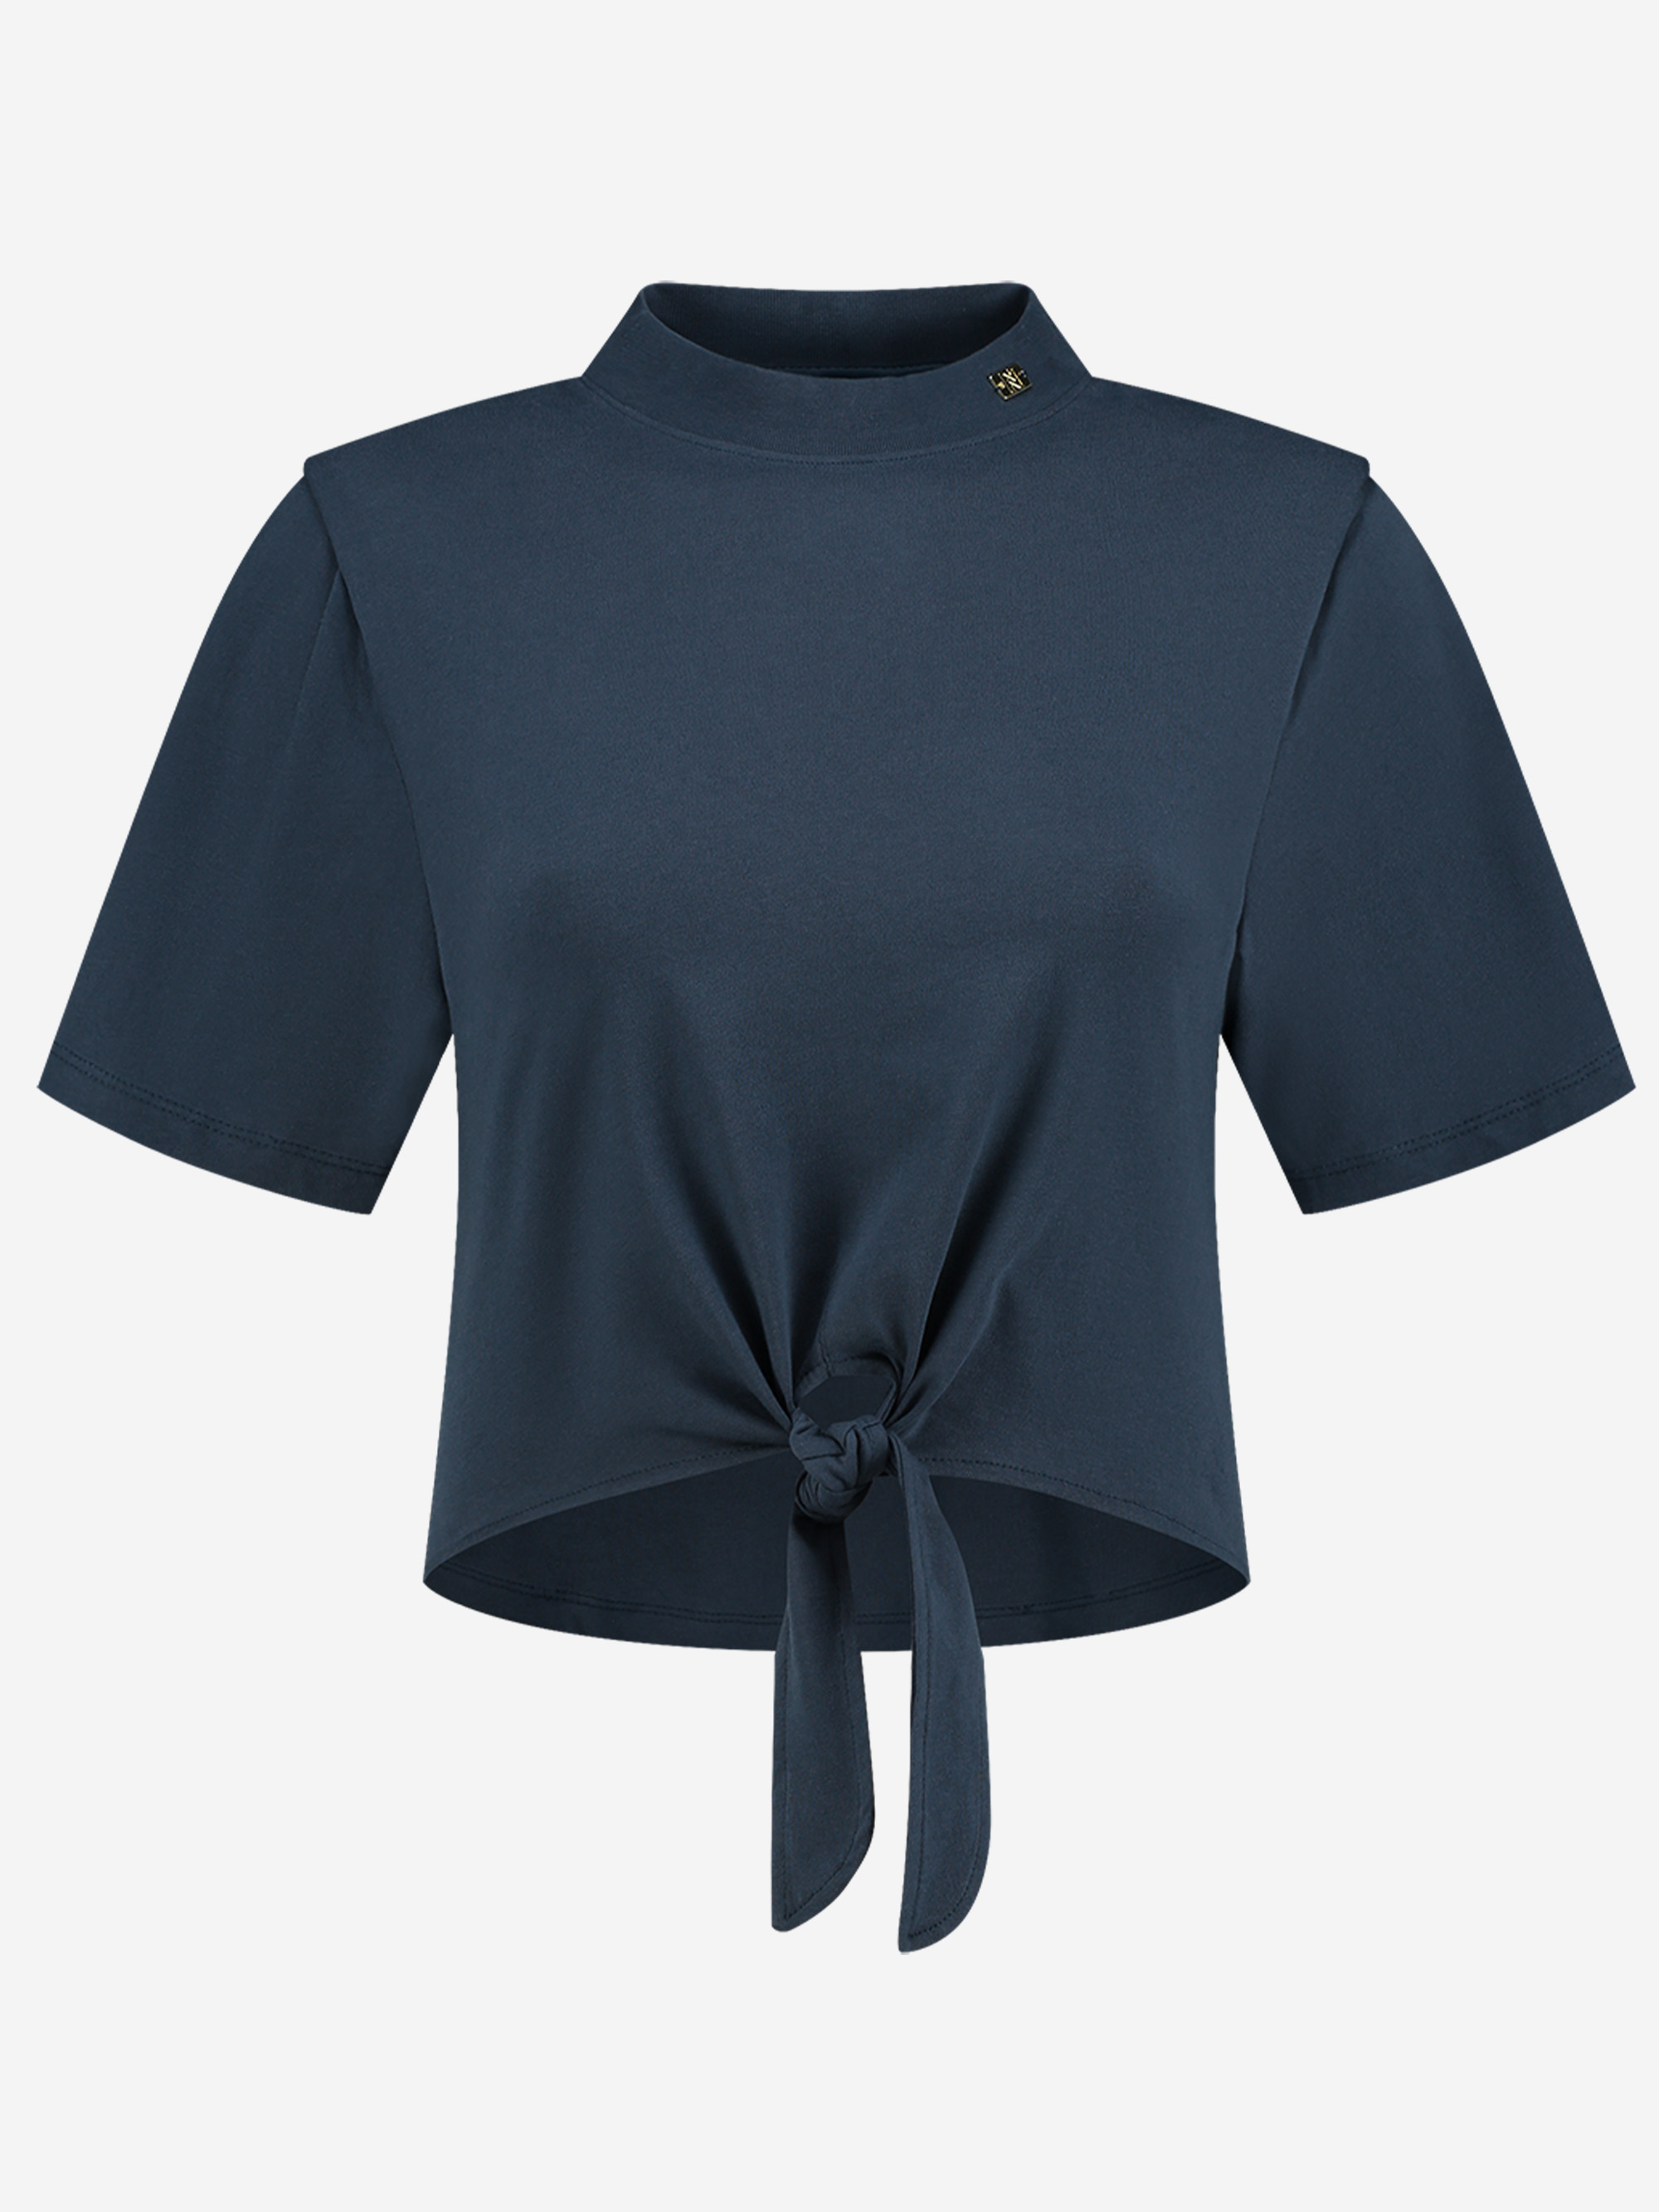 T-shirt with tie knot